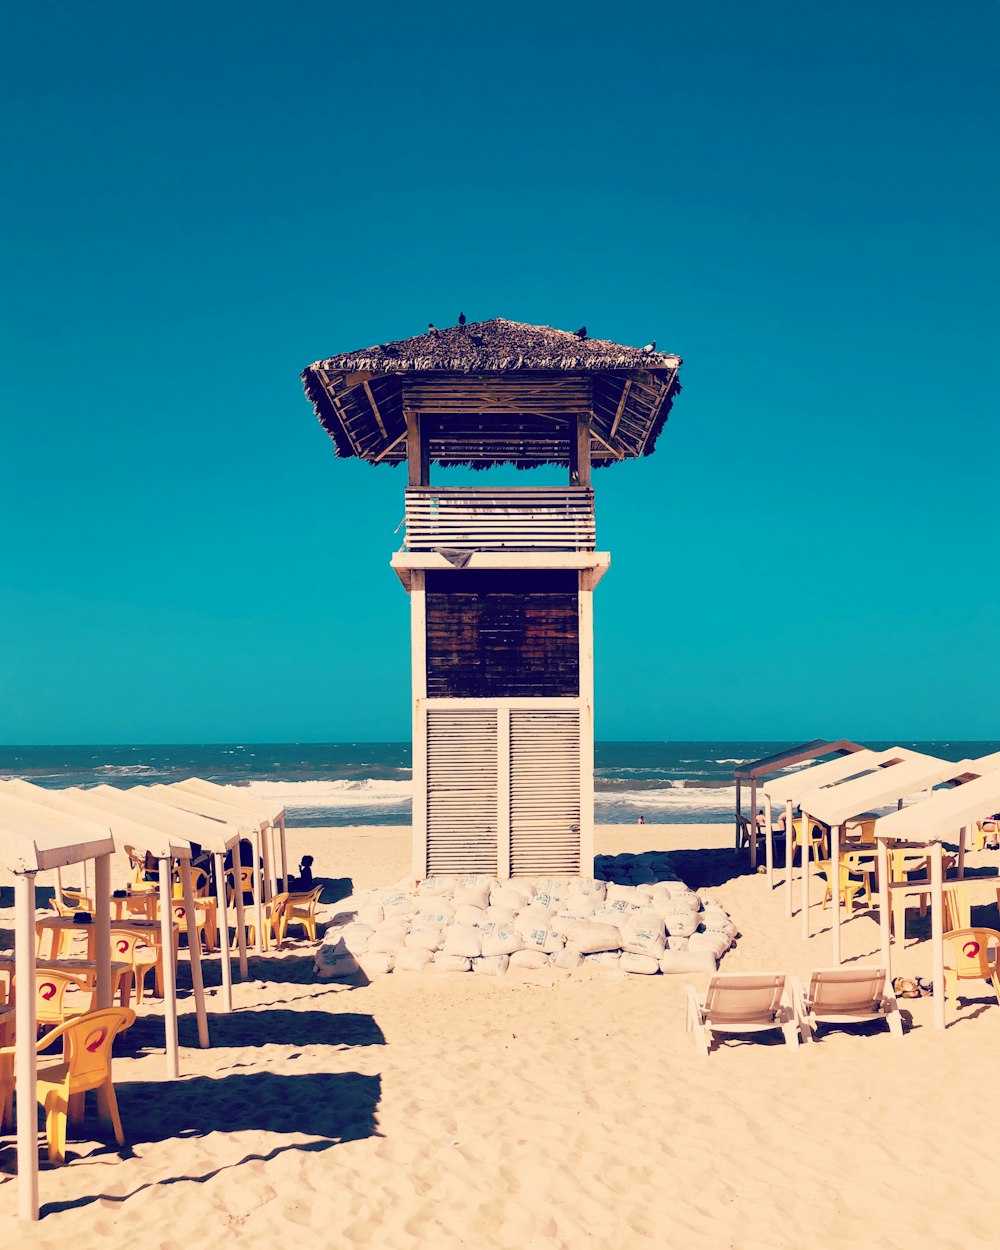 brown and white wooden lifeguard tower